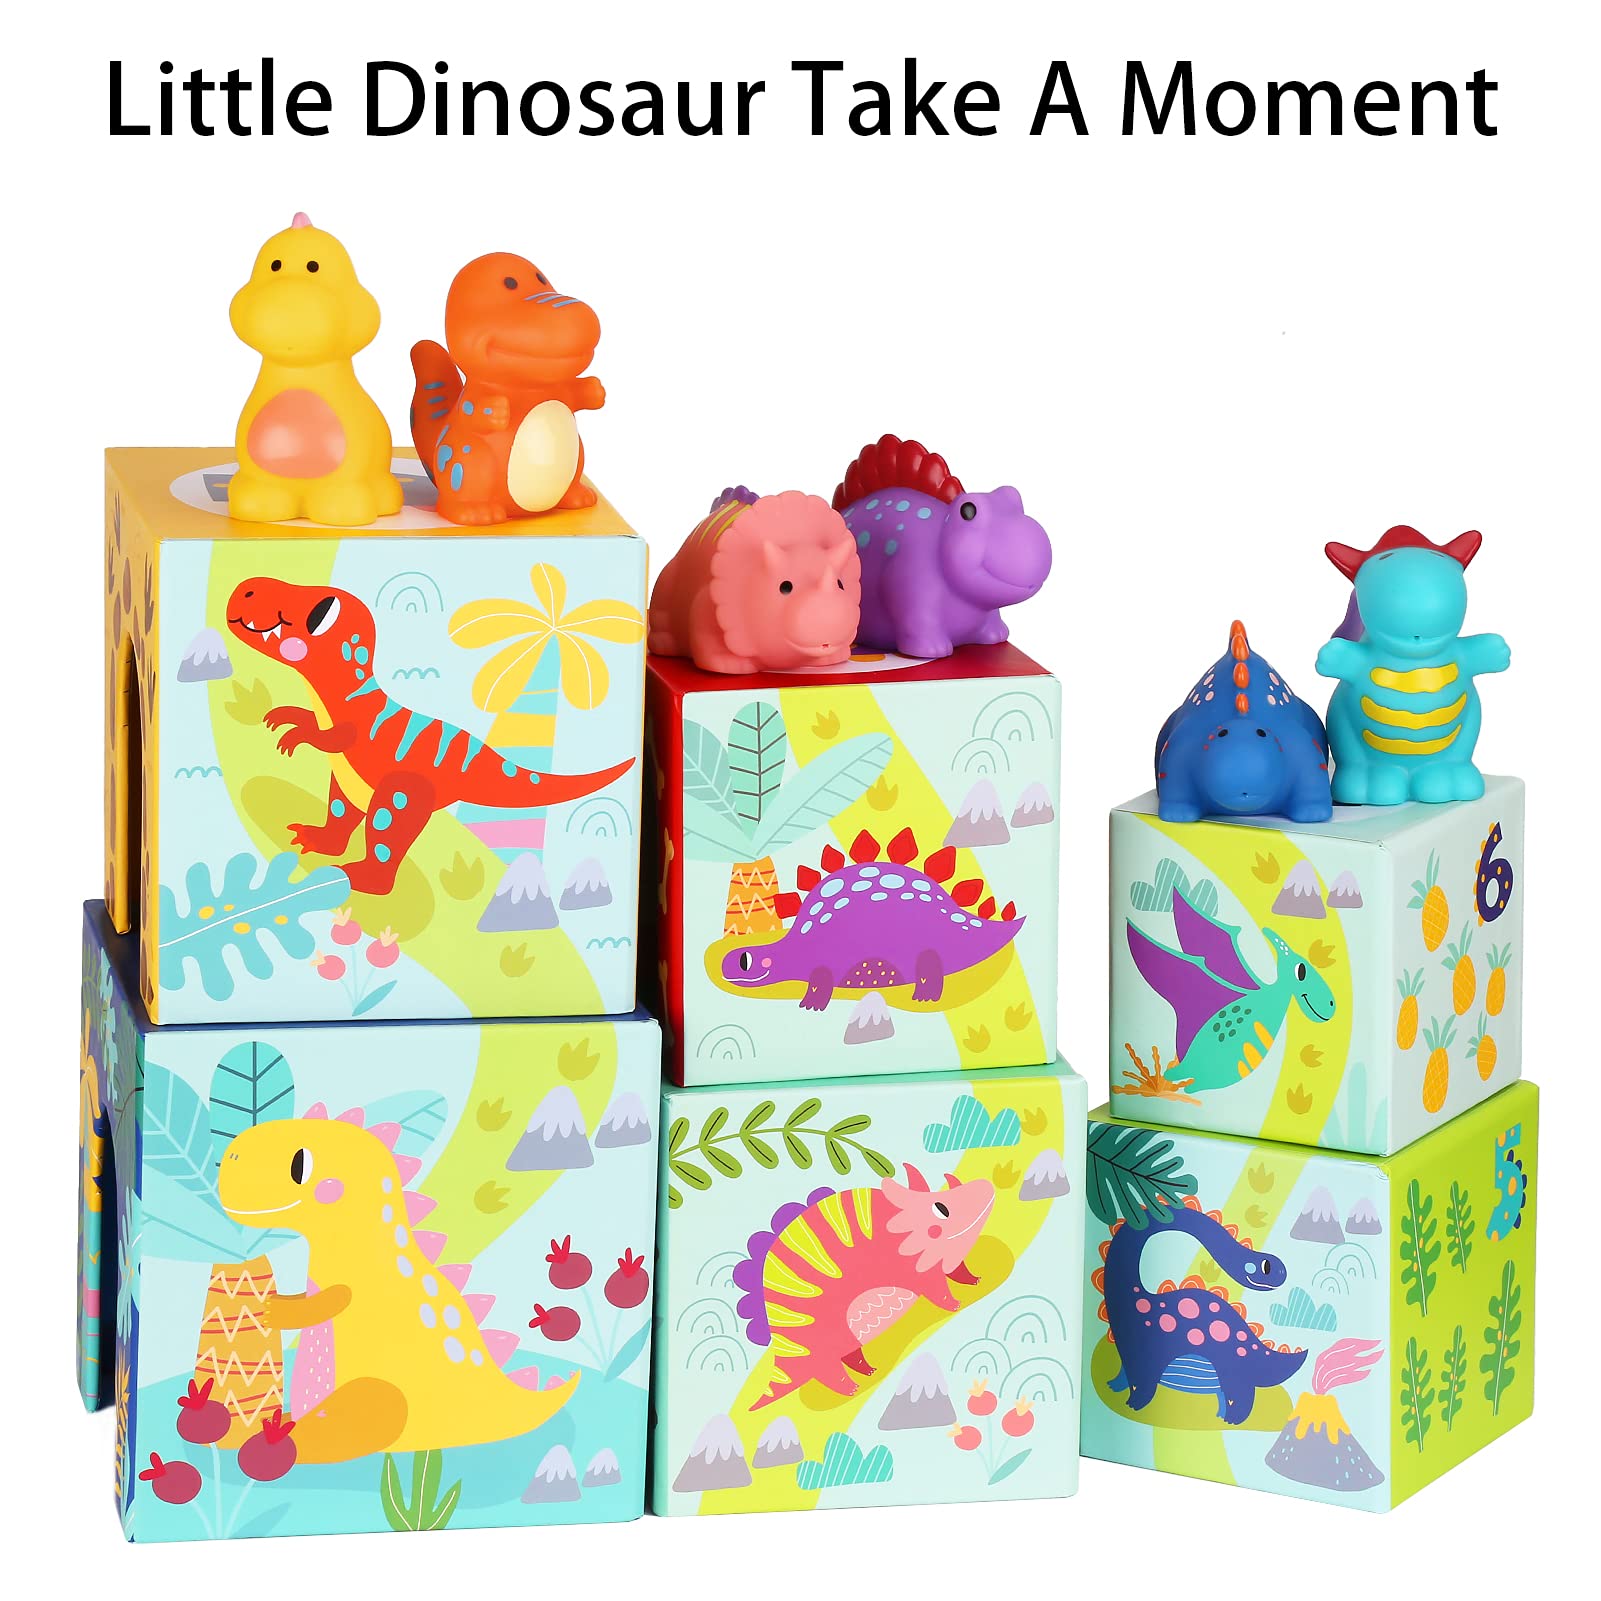 KMTJT Toddlers and Babies Dinosaur Sorting and Stacking Toys Blocks for 1-3 Kids Preschool Learning, Numbers Nesting Boxes Montessori Toys Gifts for 1 2 3 Year Old Baby Boys Girls